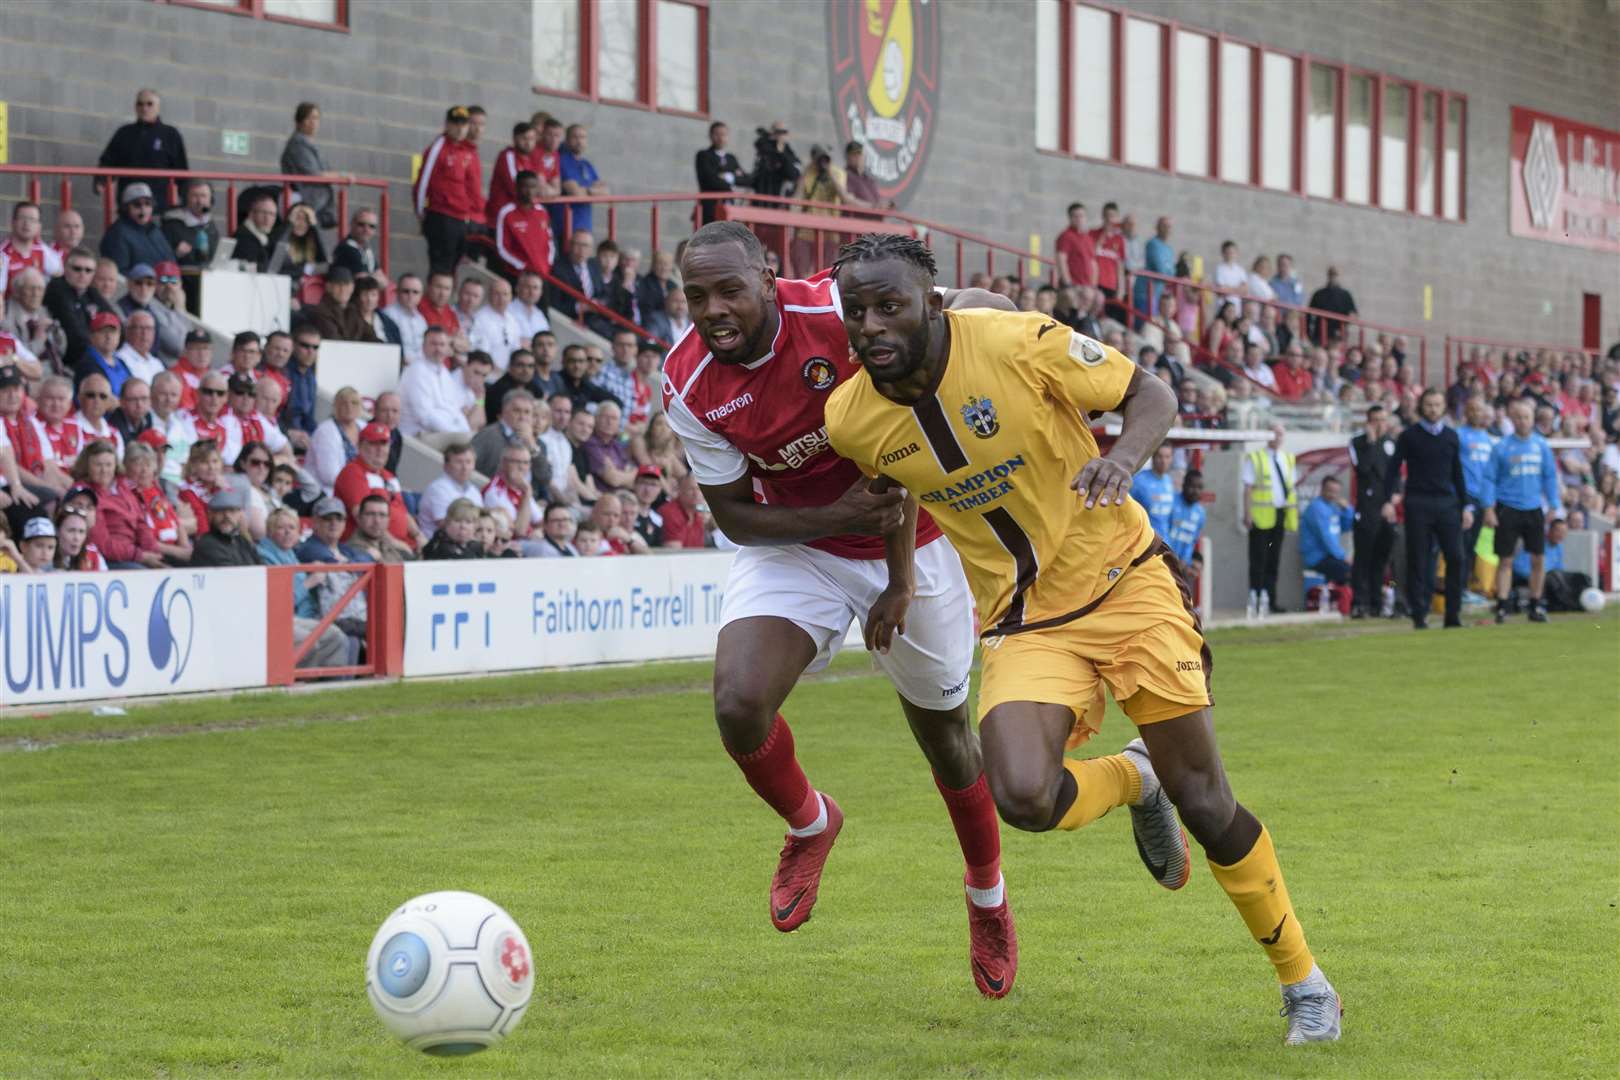 Myles Weston gives chase against Sutton Picture: Andy Payton